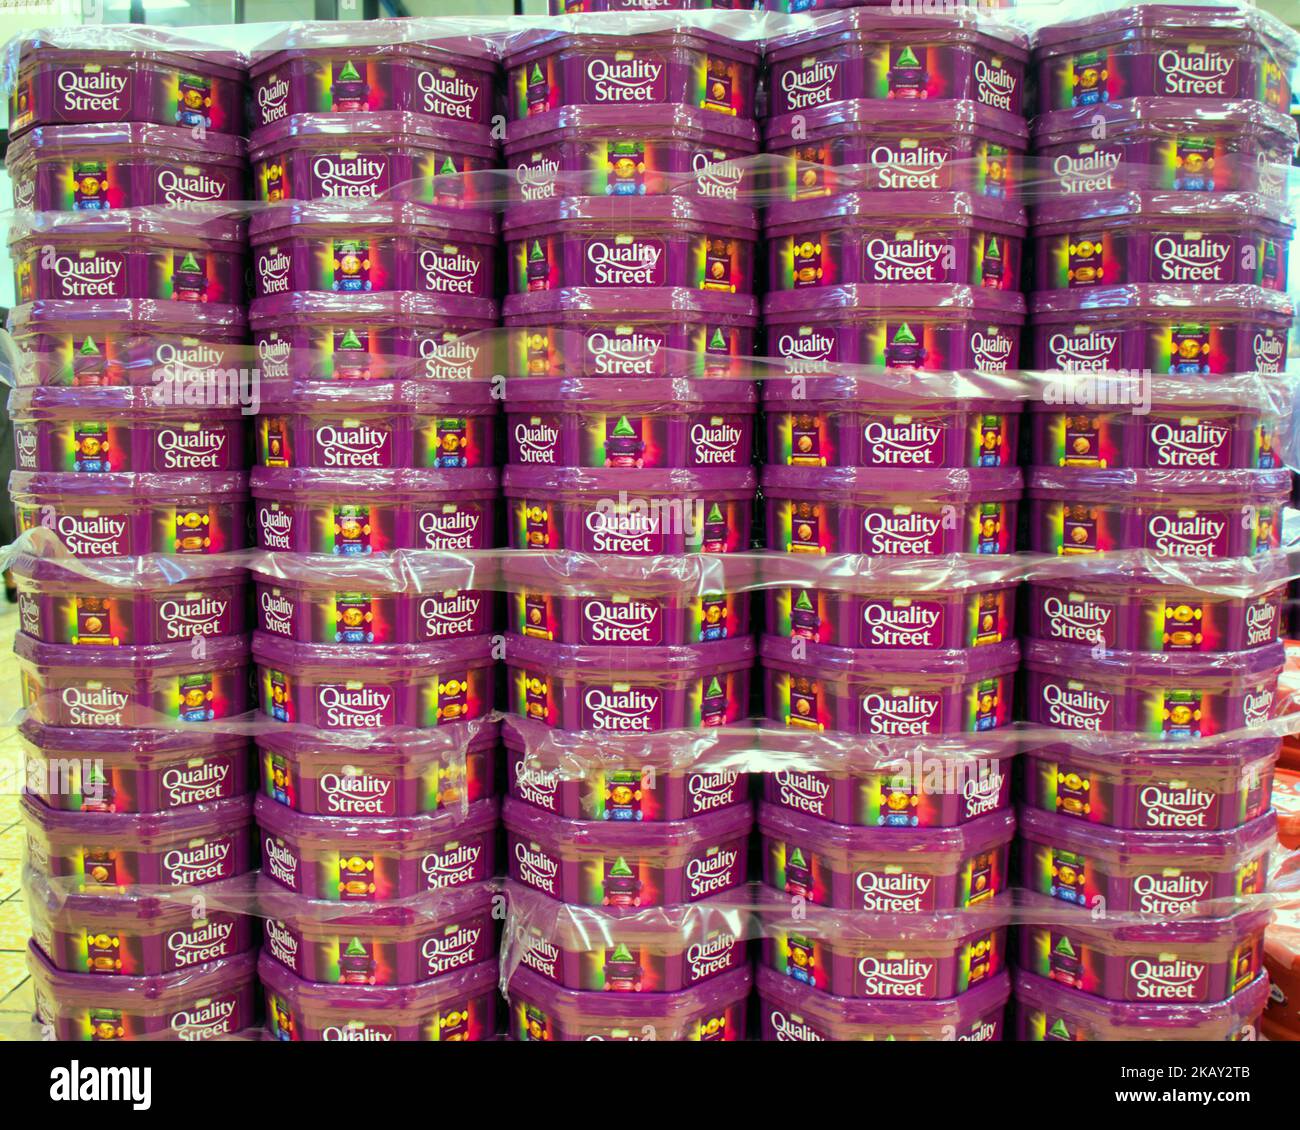 Rowntree quality street tins in supermarket piles Stock Photo